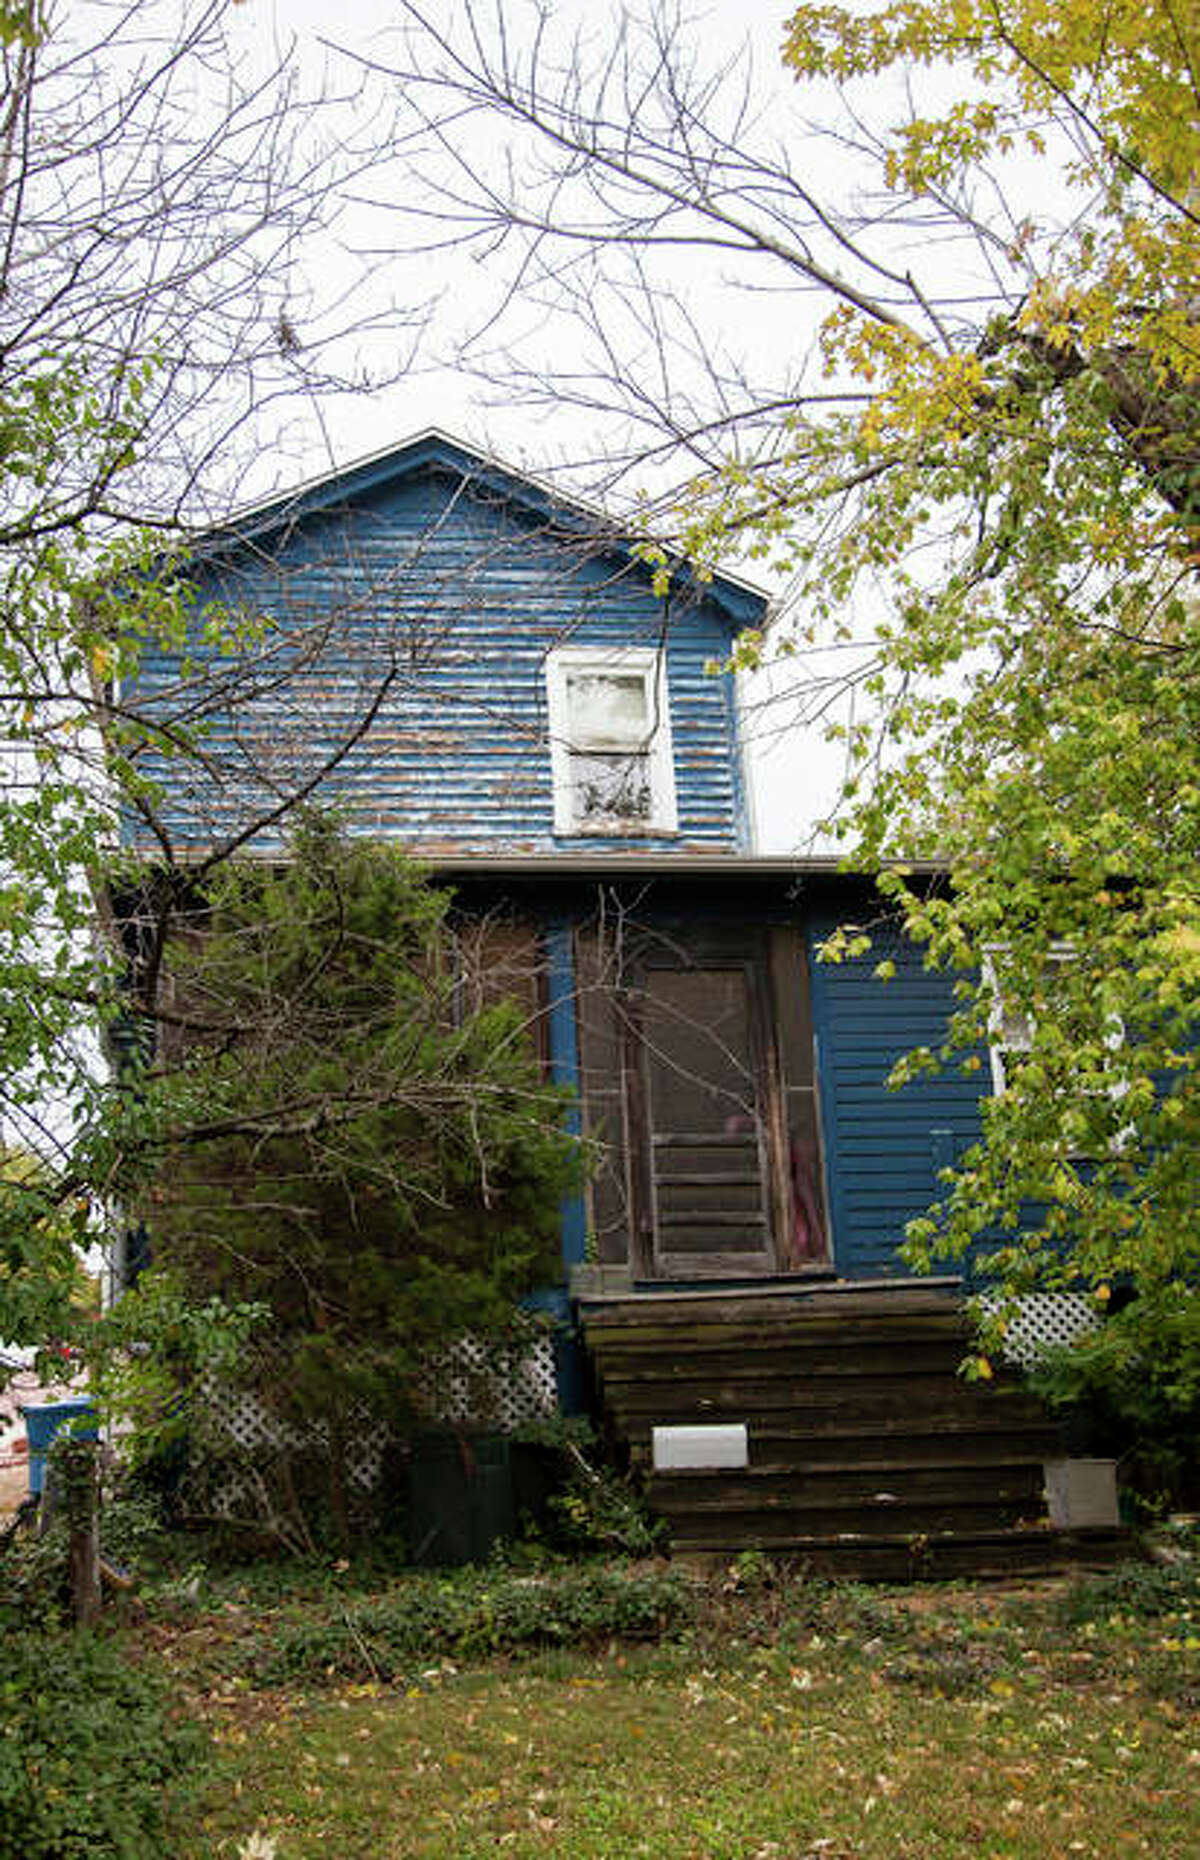 Side view of 507 William St. in Alton’s historic Christian Hill neighborhood. Council members approved a resolution for the commencement of demolition proceedings concerning the property Wednesday.